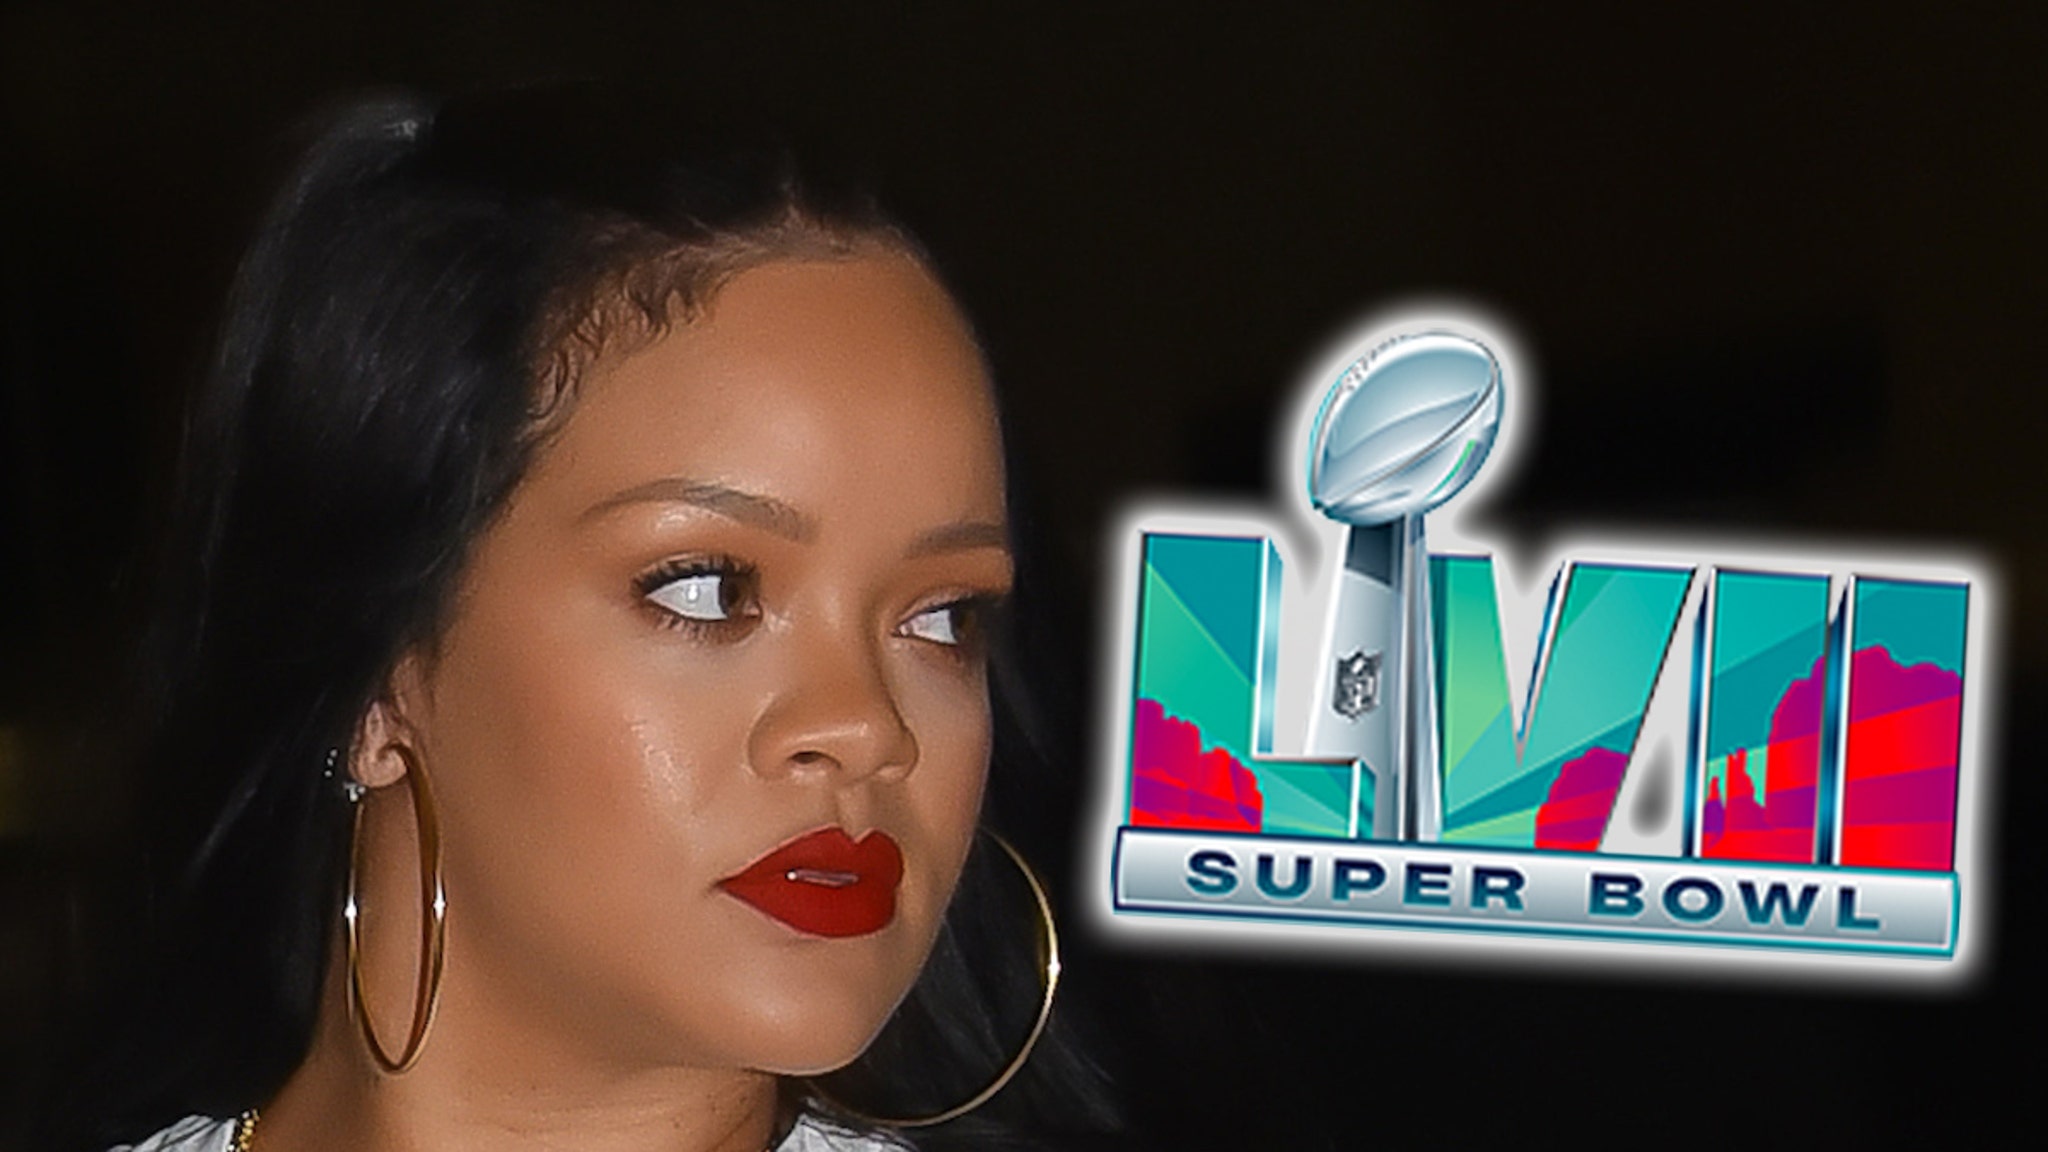 Rihanna has yet to choose Super Bowl guest performer, could be a solo show